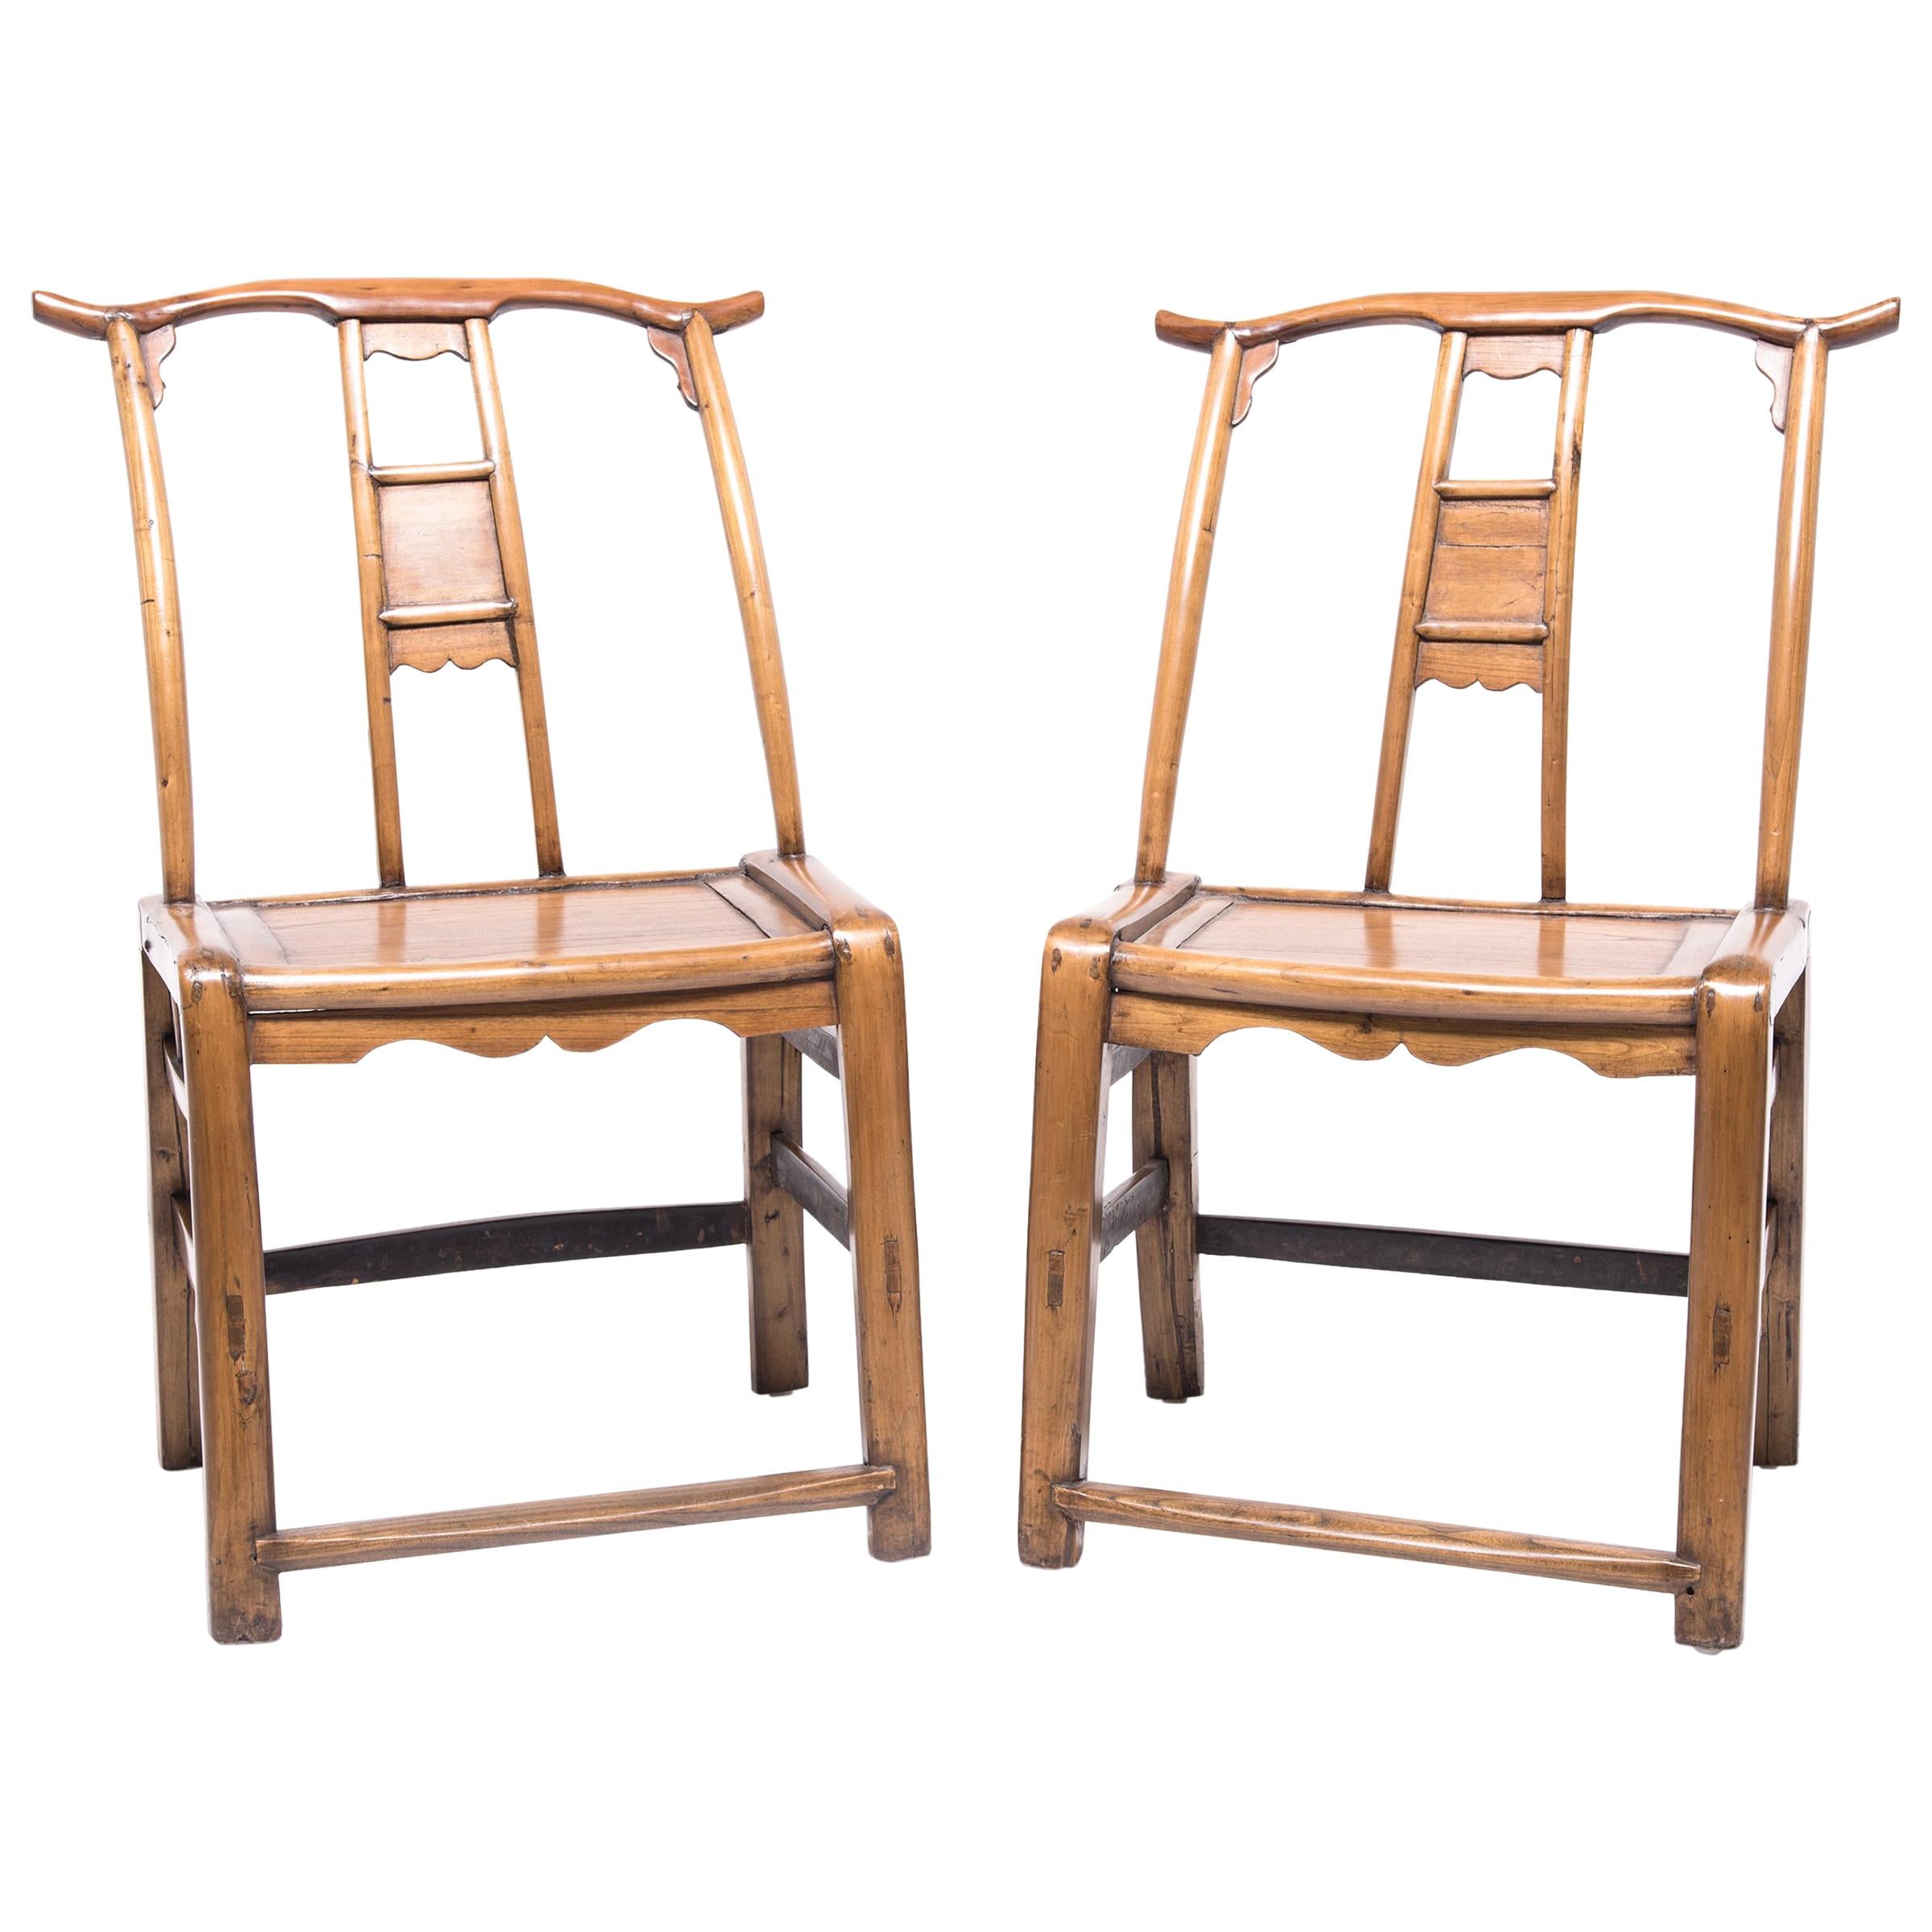 Pair of 19th Century Chinese Provincial Bentform Chairs